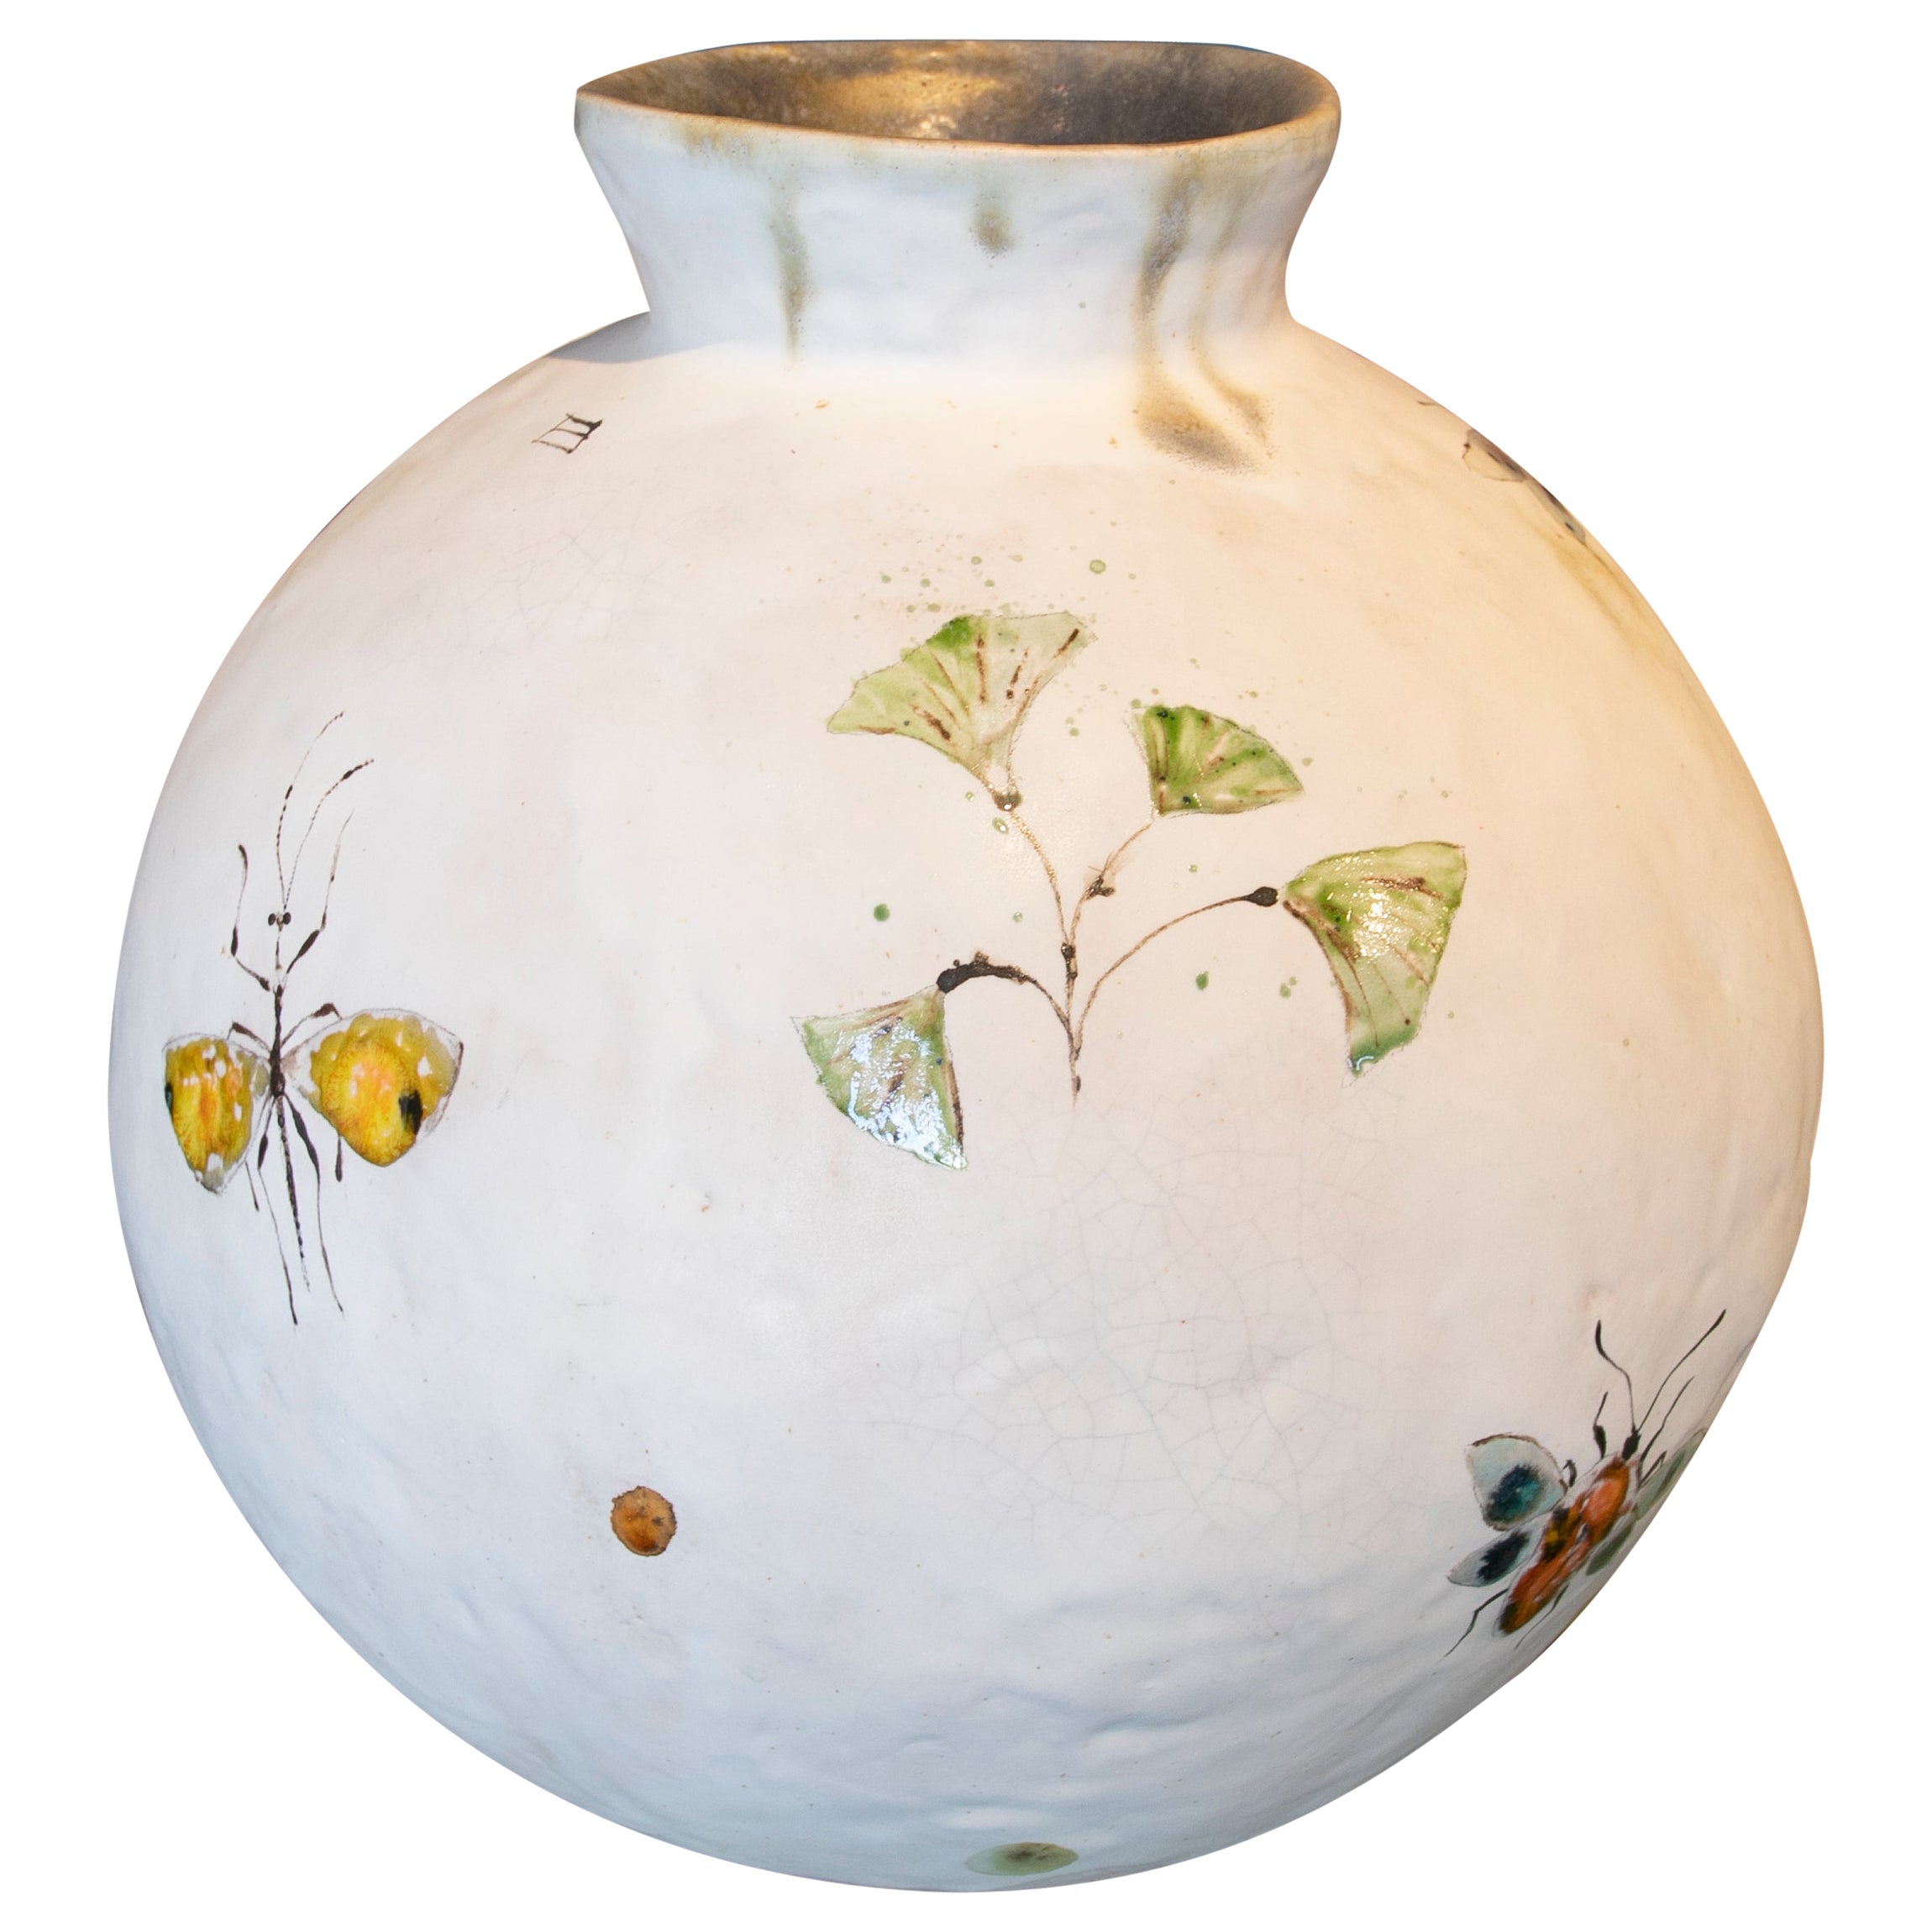 Round-Shaped Vase in Hand-Painted Ceramic with Insects For Sale at 1stDibs